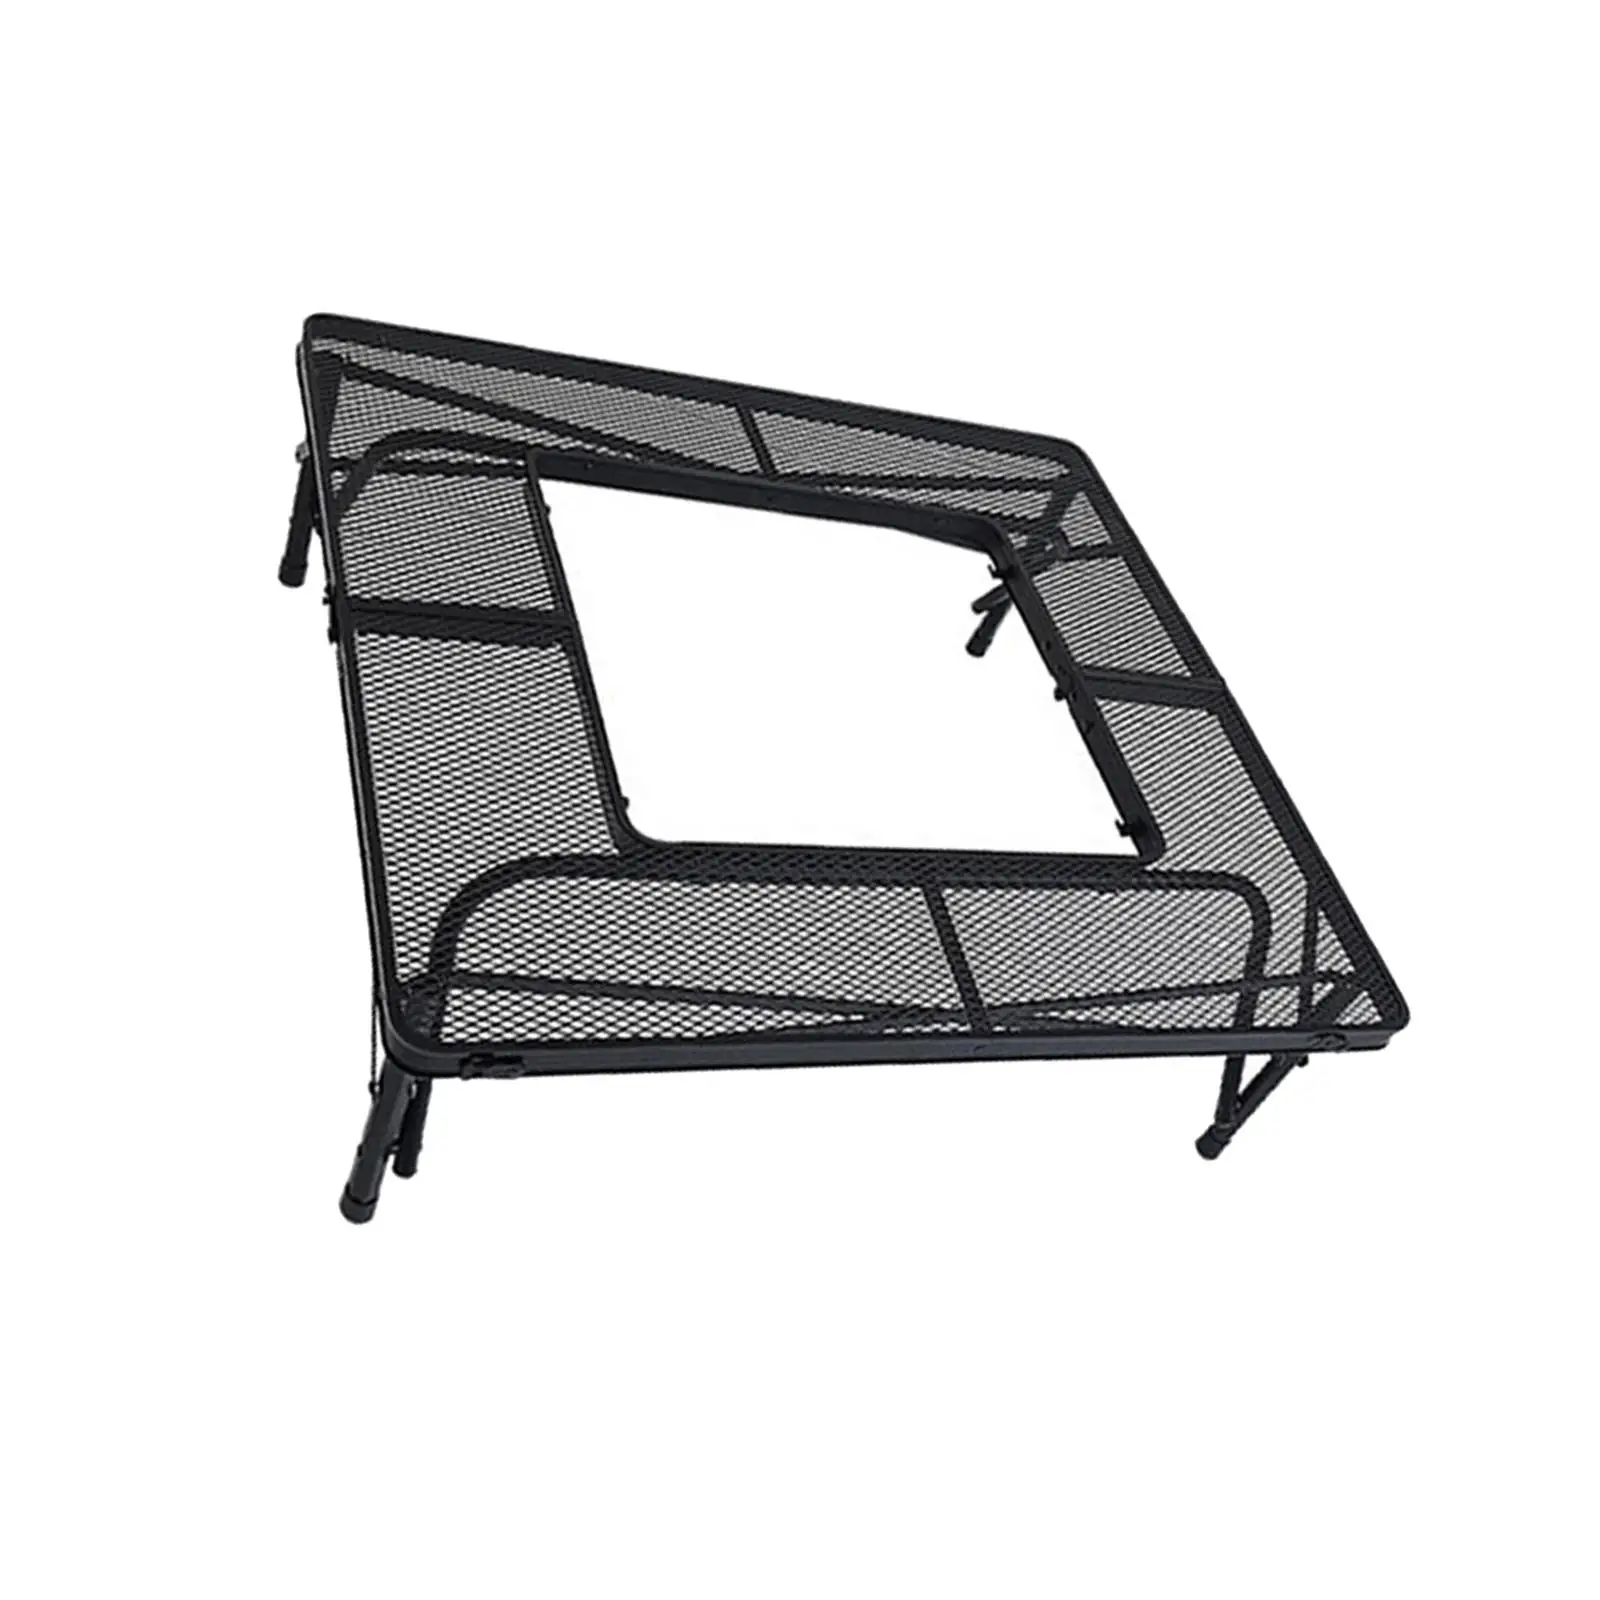 Outdoor Foldable Table Aluminium Multifunctional with A Carry Bag Camping Tables Barbecue Oven Table for Patio Backpacking Beach